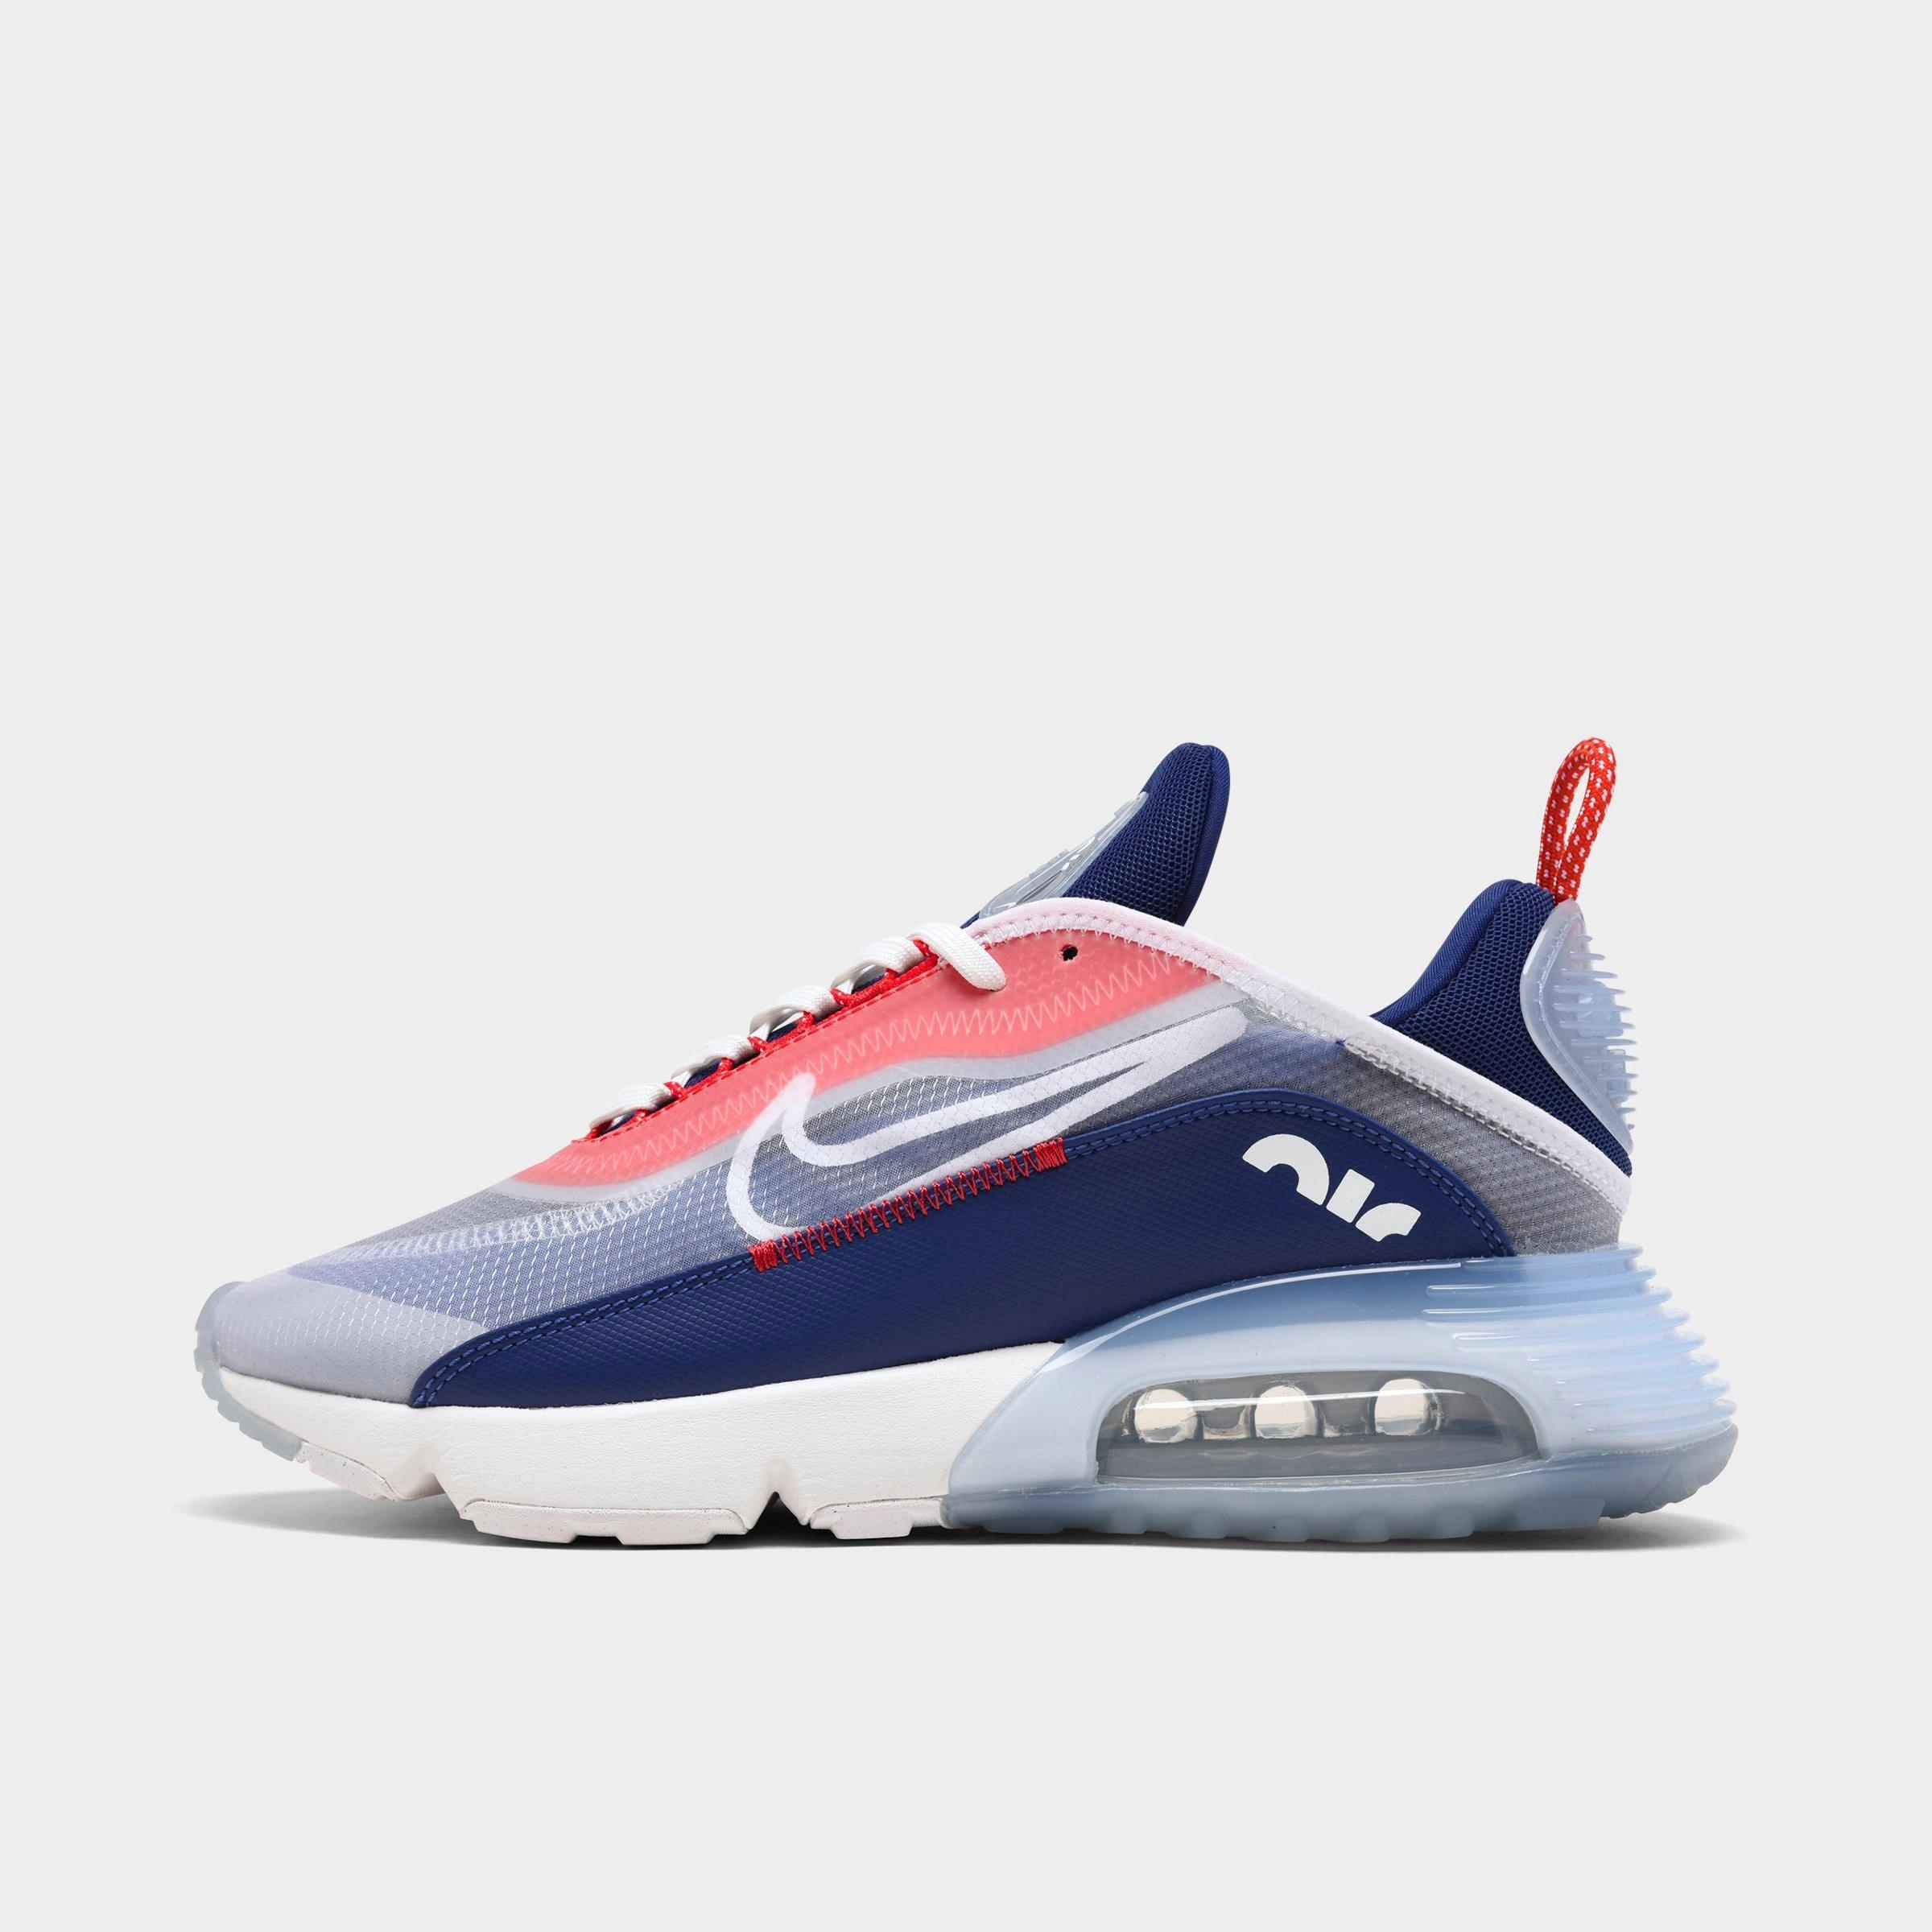 Men's Nike Air Max 2090 Casual Shoes| Finish Line